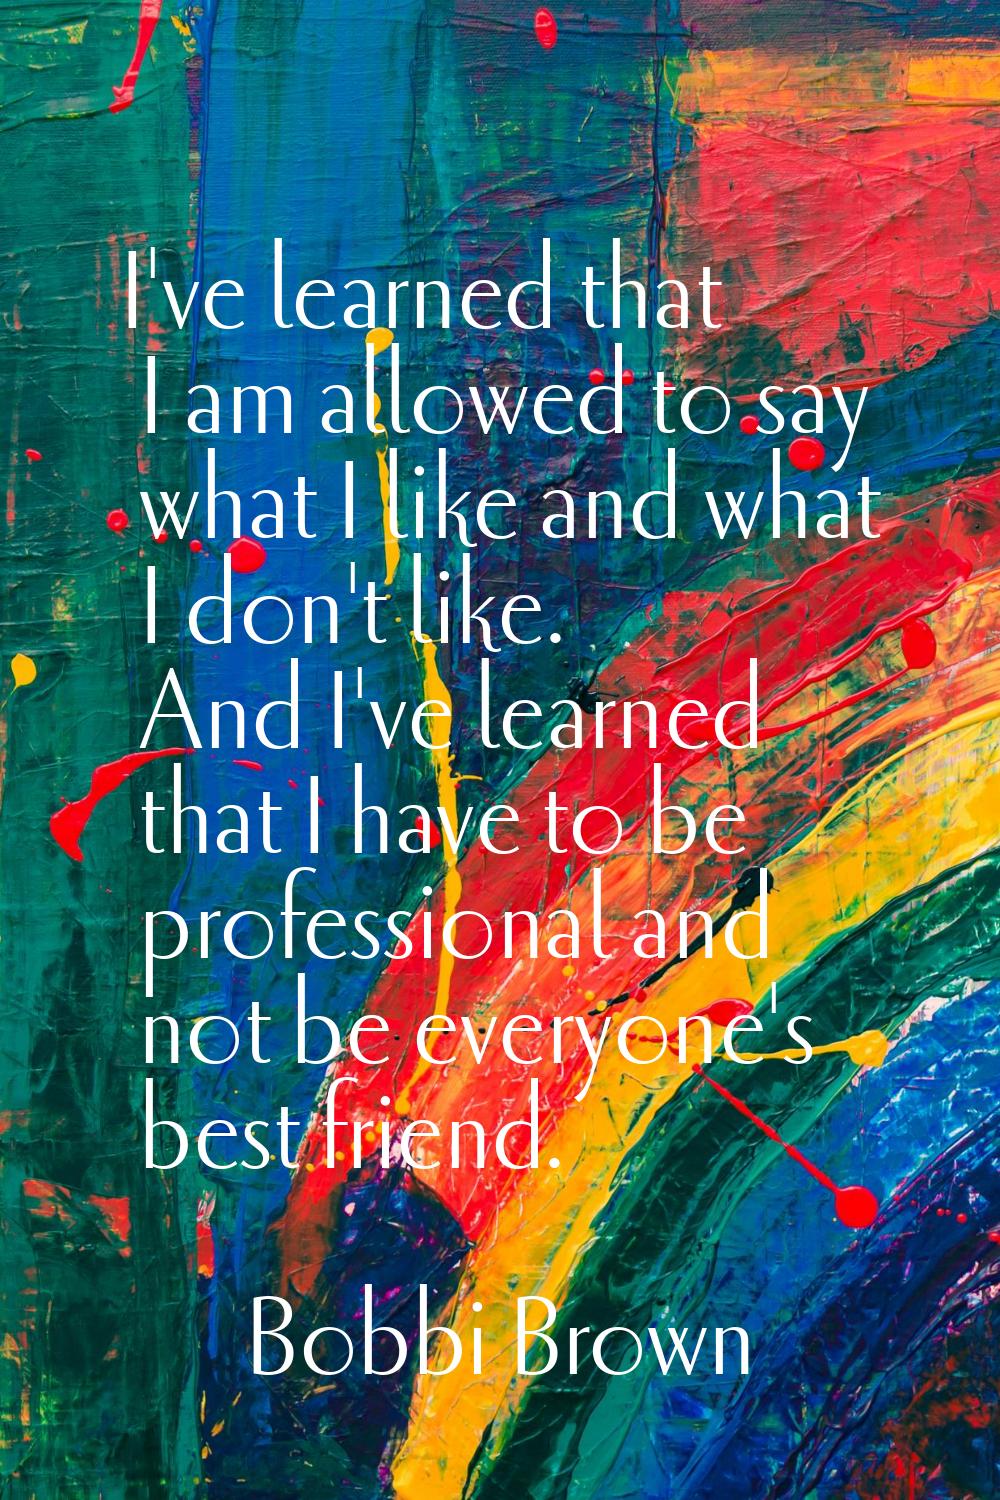 I've learned that I am allowed to say what I like and what I don't like. And I've learned that I ha